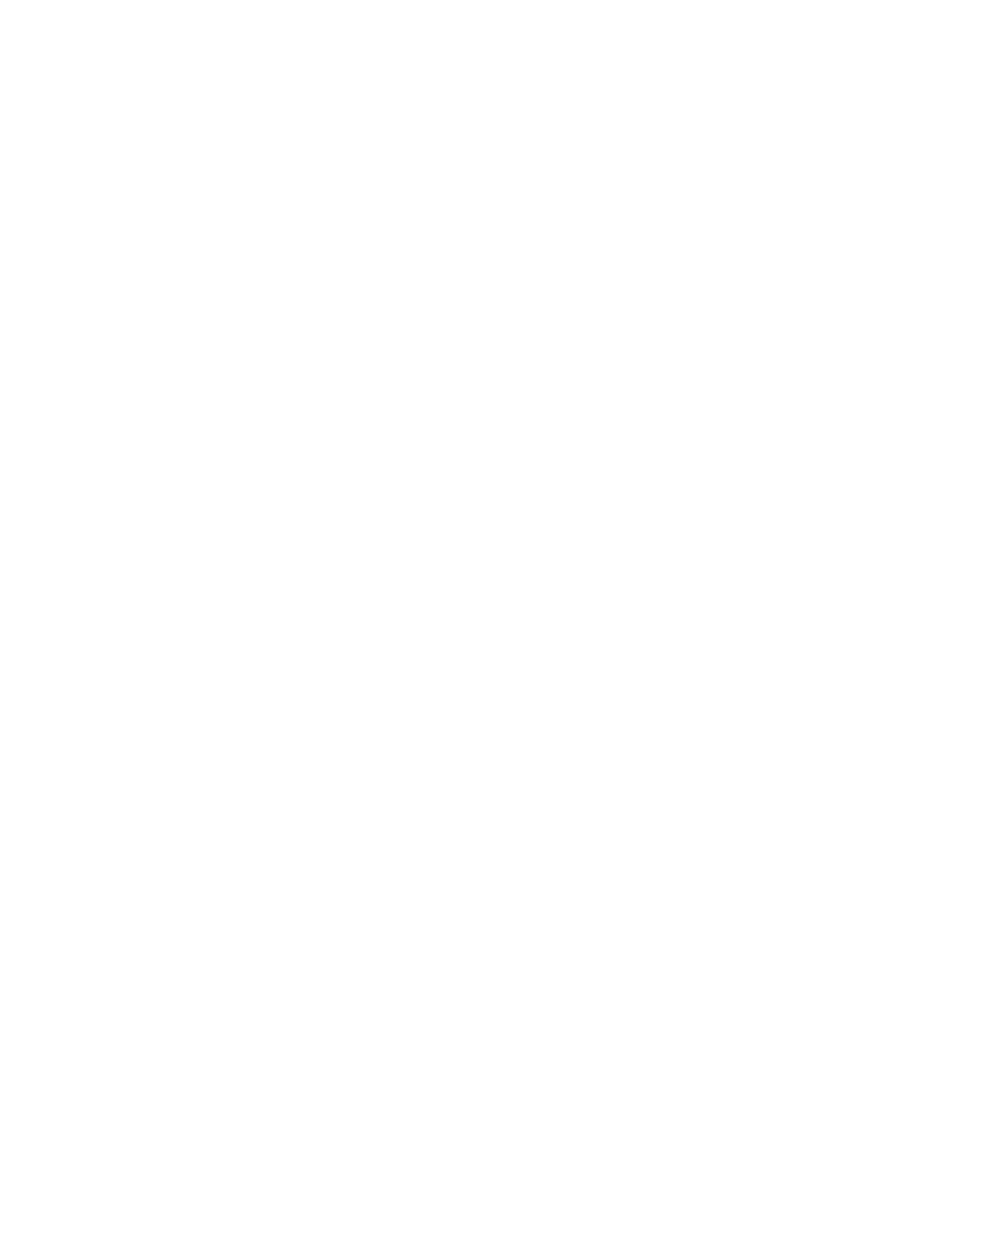 SBA U.S. Small Business Administration WOSB Certified